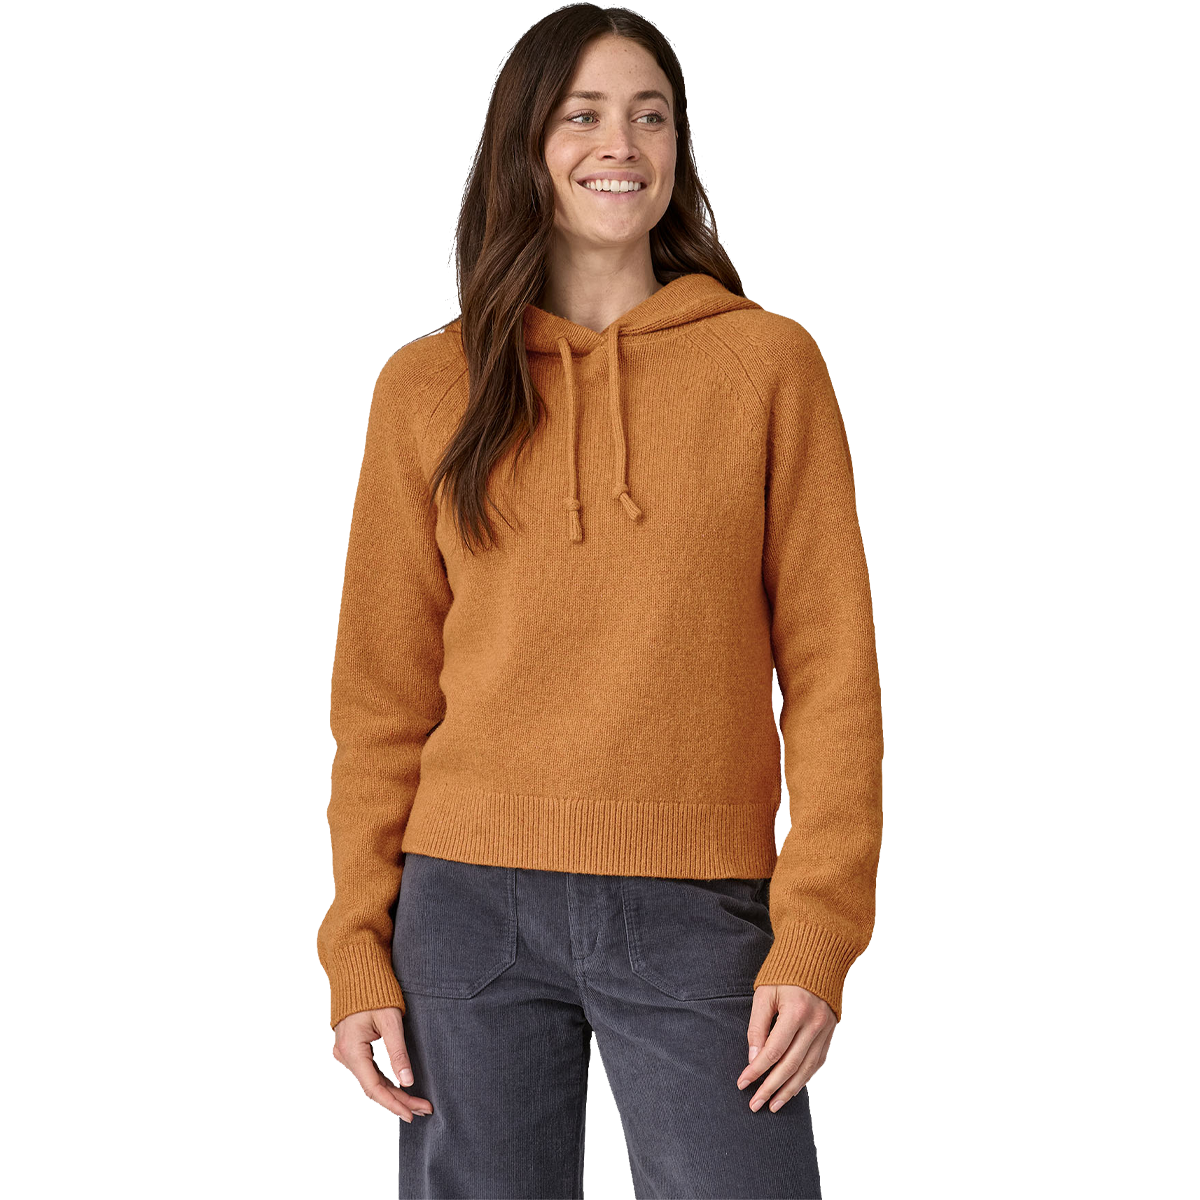 New Patagonia Women's Ahnya Pullover Sweater ￼